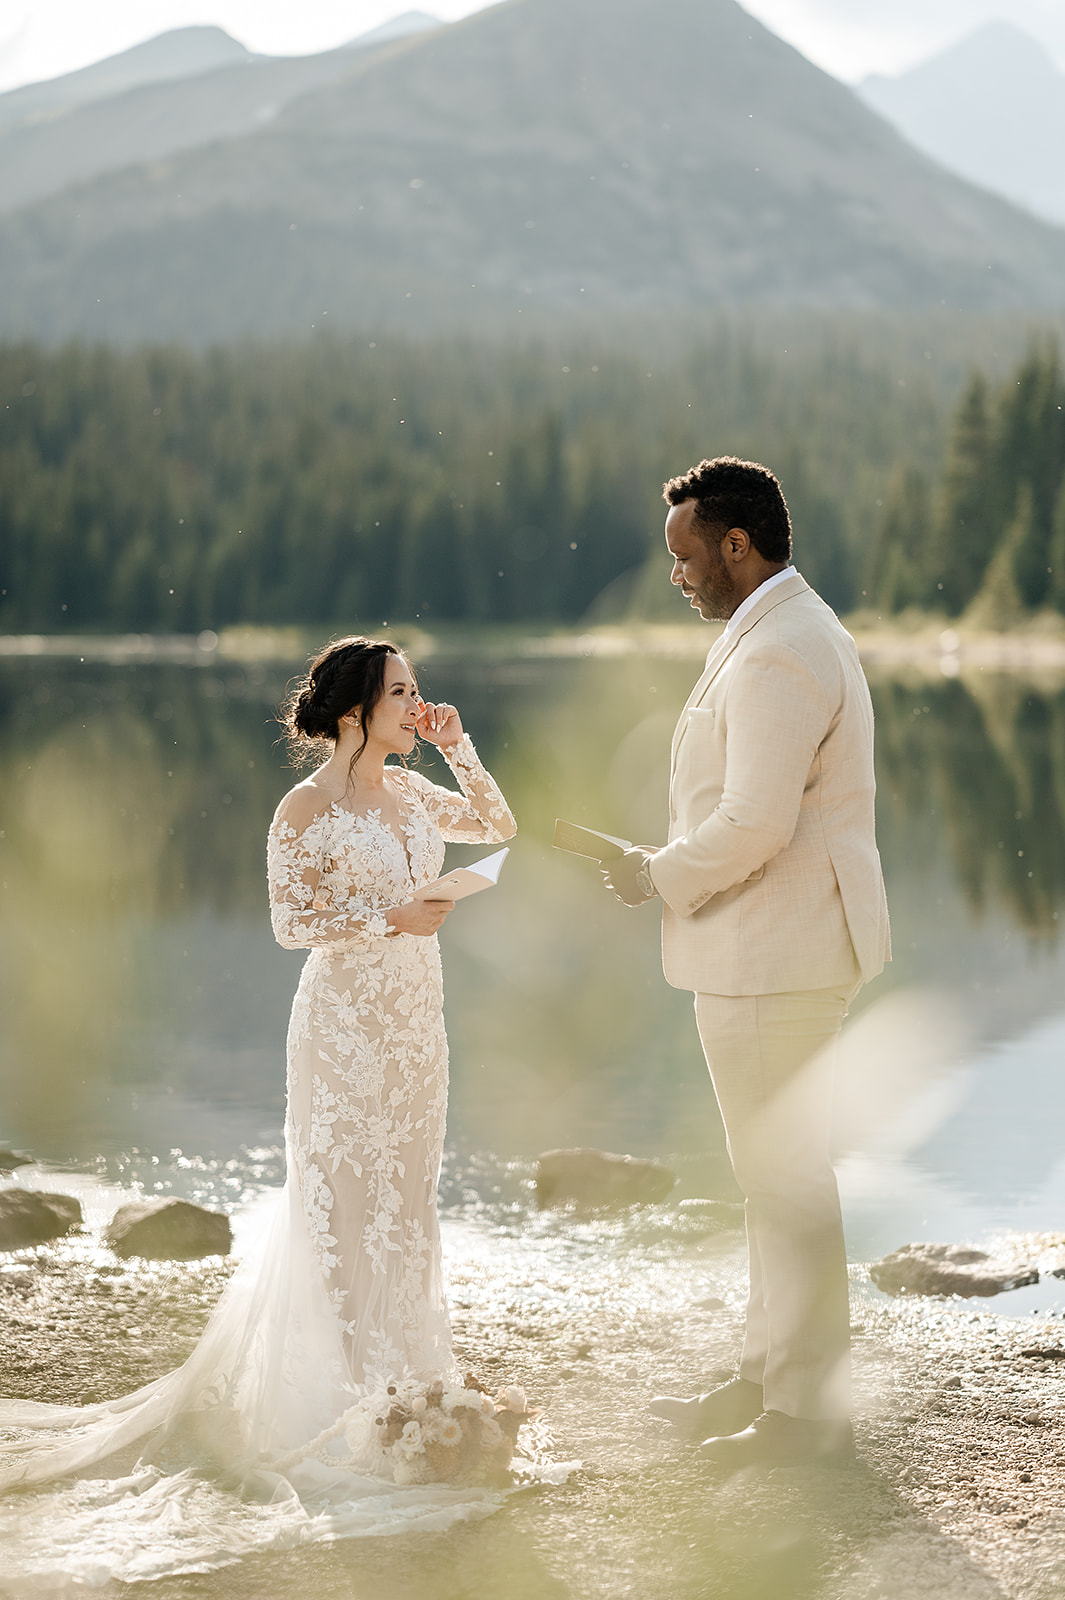 How to Plan an Elopement - Your Elopement Timeline - Vows and Peaks